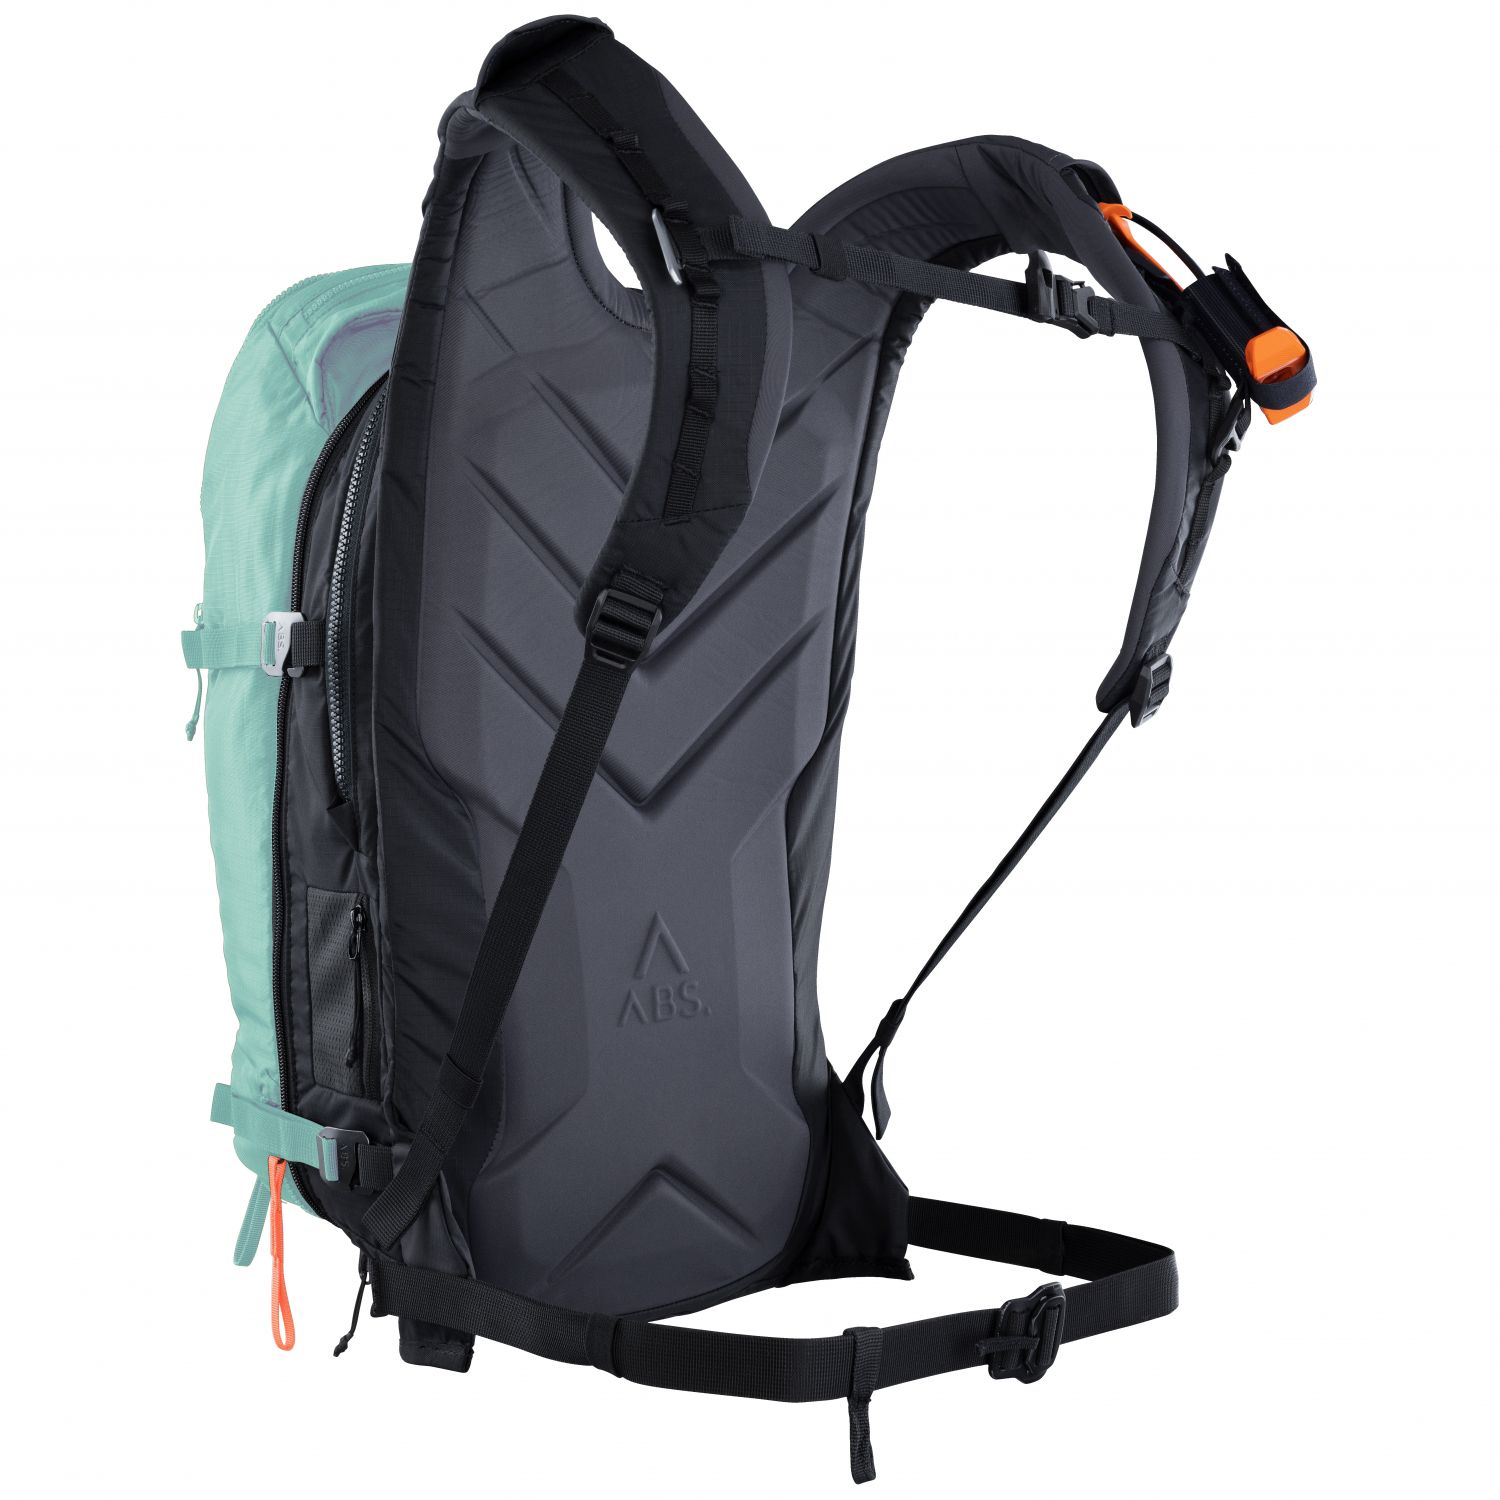 Arcteryx Voltair Avalanche Airbag Backpack - Review - The Backcountry Ski  Touring Blog